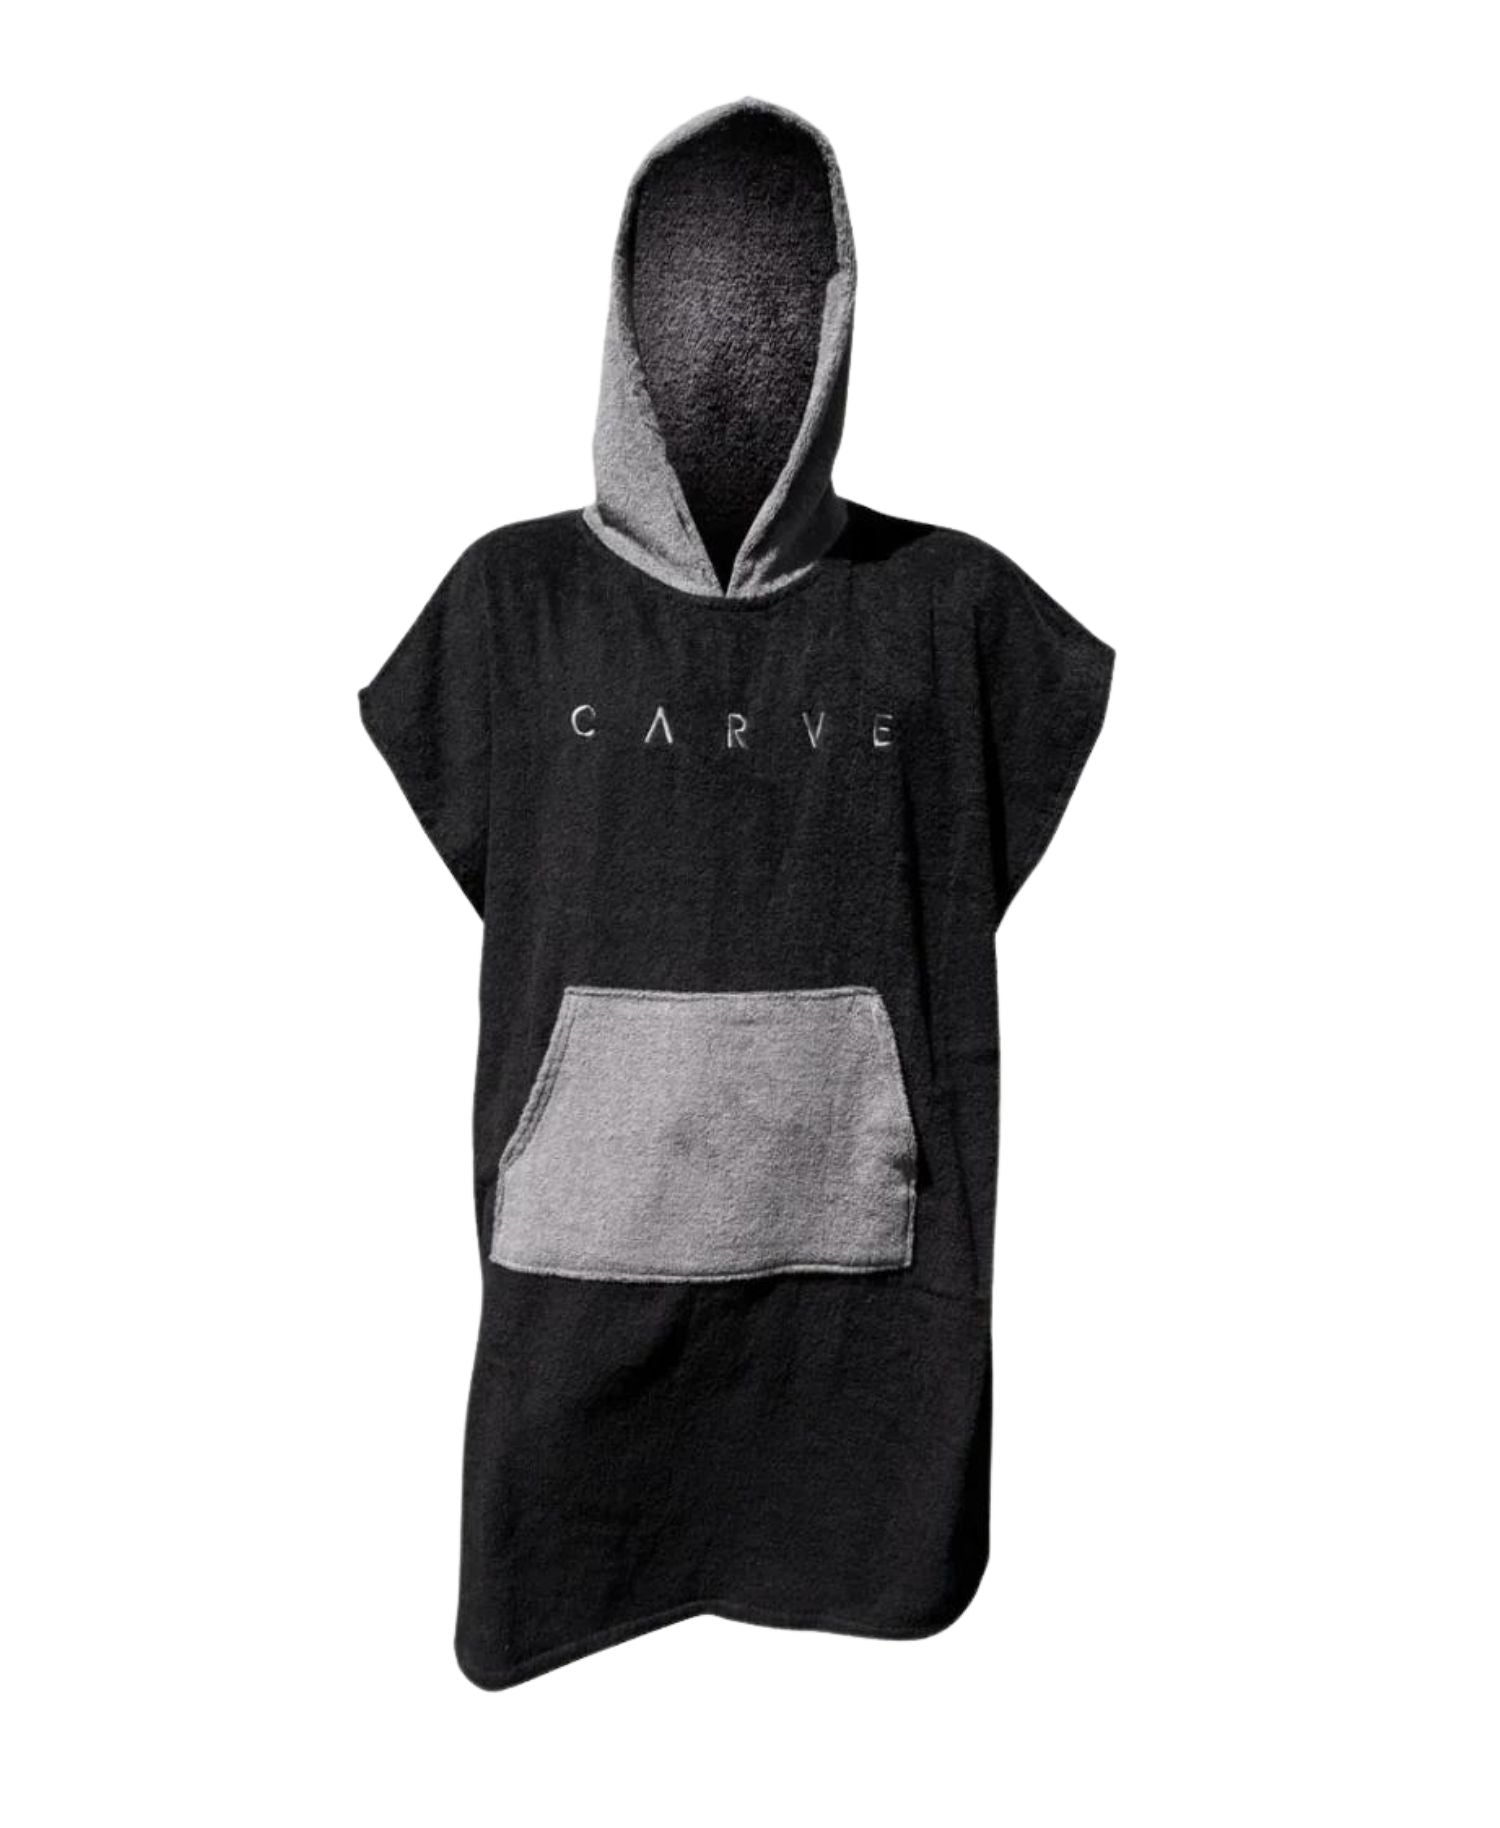 CARVE SUMMER STORM YOUTH TOWEL PONCHO - YOUTH HOODED TOWEL